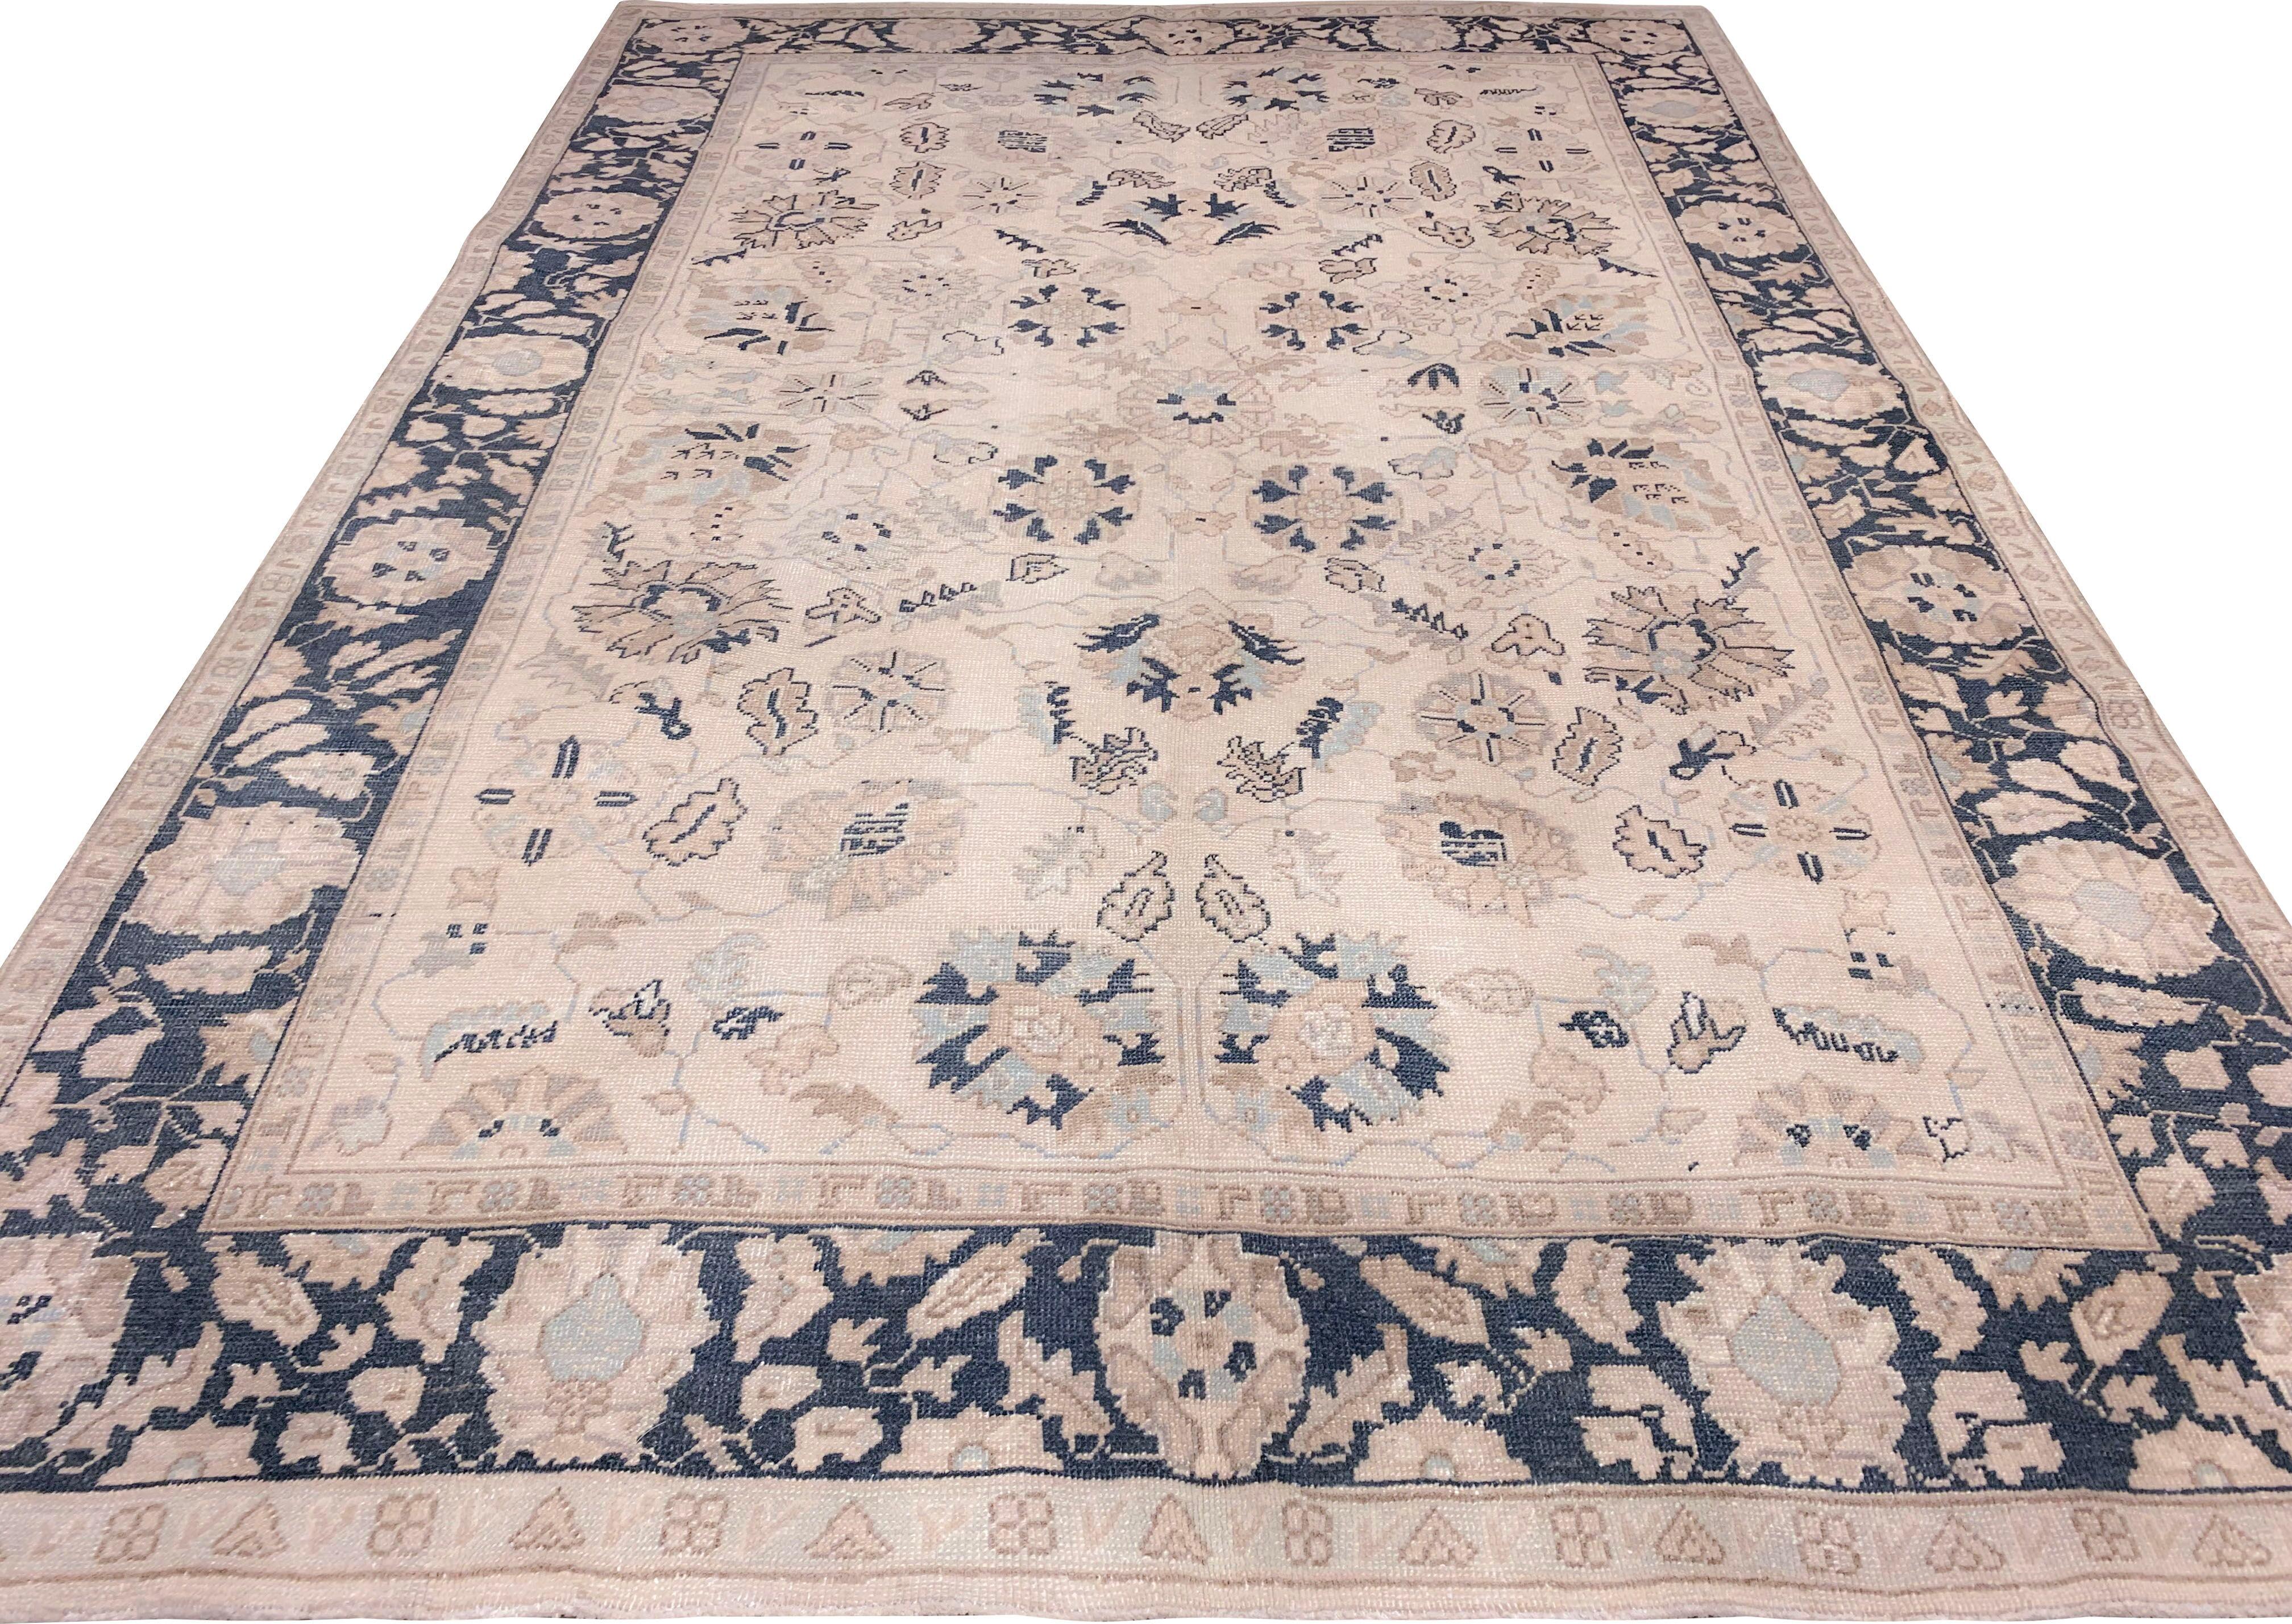 Vintage Turkish Oushak rug, circa 1940, 6'11 x 9'11. Handwoven in Turkey where rug weaving is the culture rather than a business. Rugs from Turkey are known for the high quality of their wool their beautiful patterns and warm colors. These designer